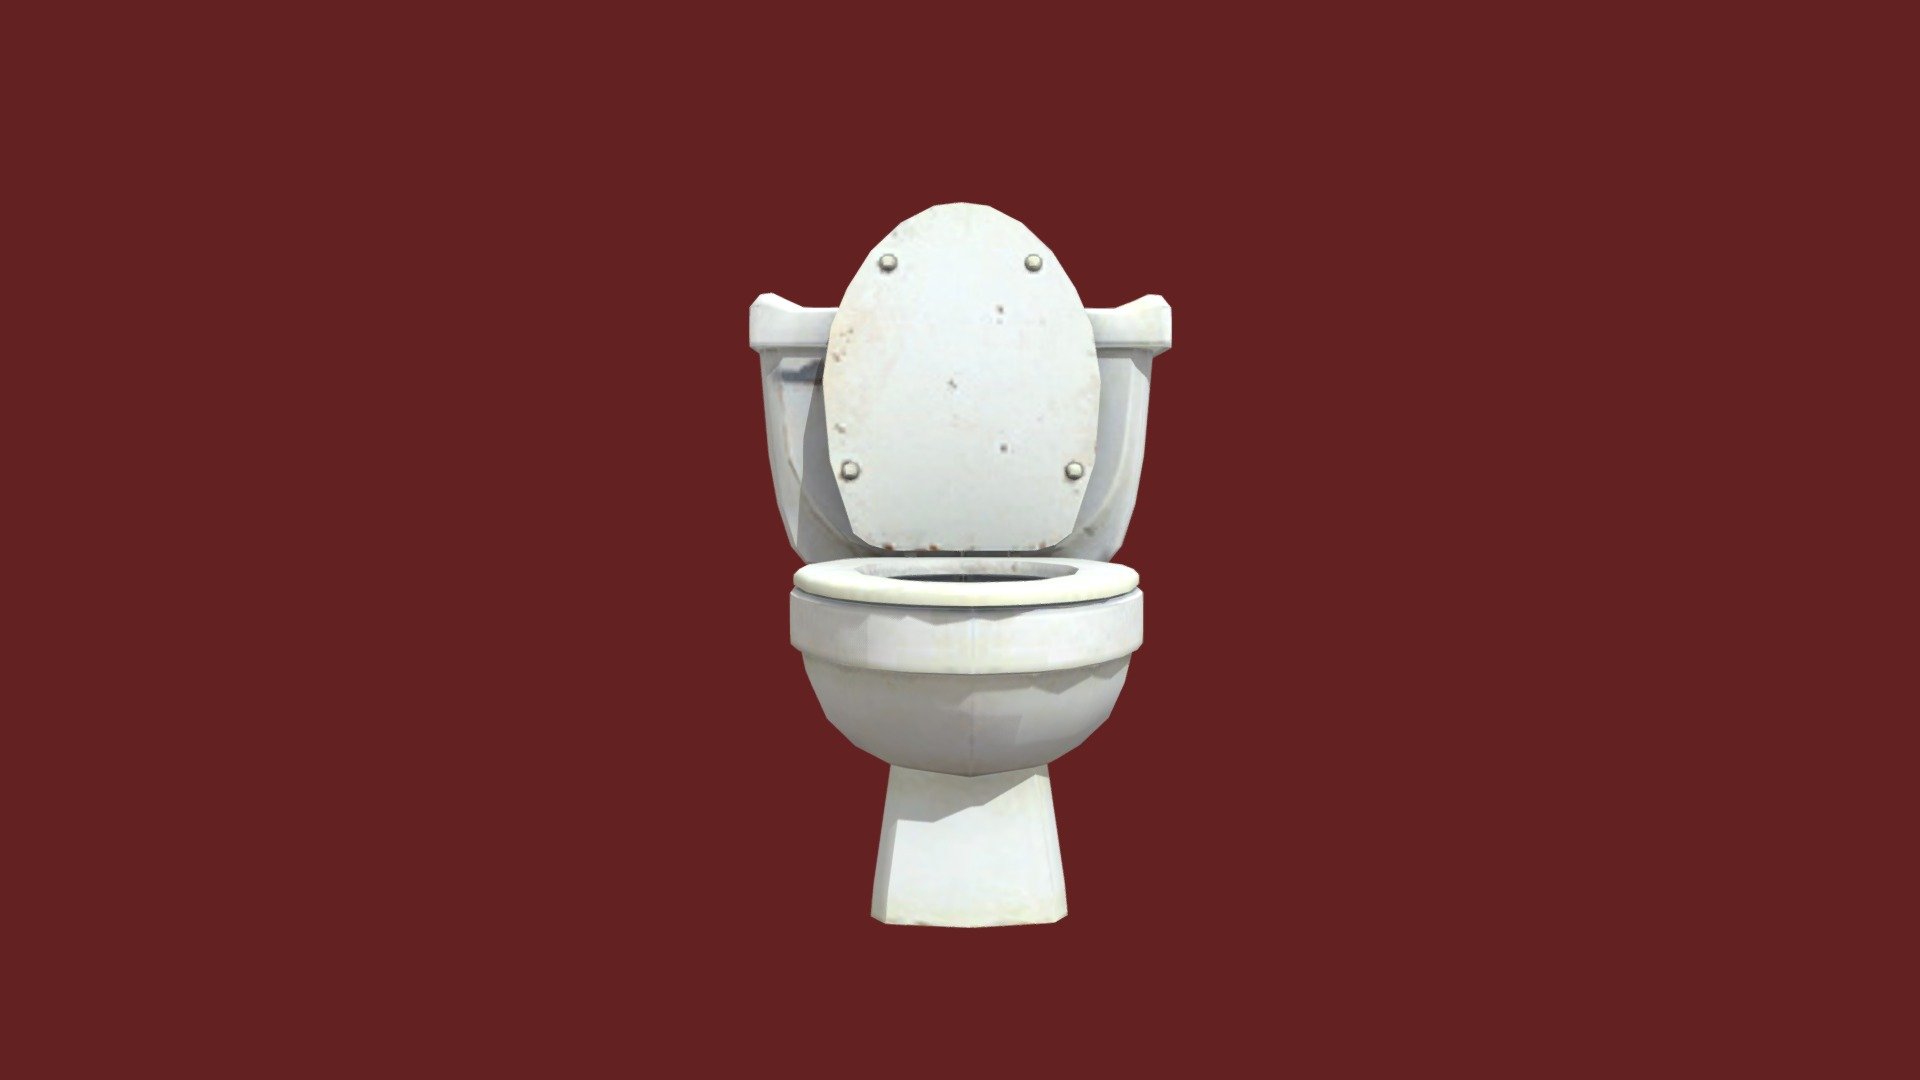 credits to pamm (@daeboommmm)

haha no download for you 😈 - skibidi toilet model - 3D model by Lil Baby (@imlilbaby2) 3d model